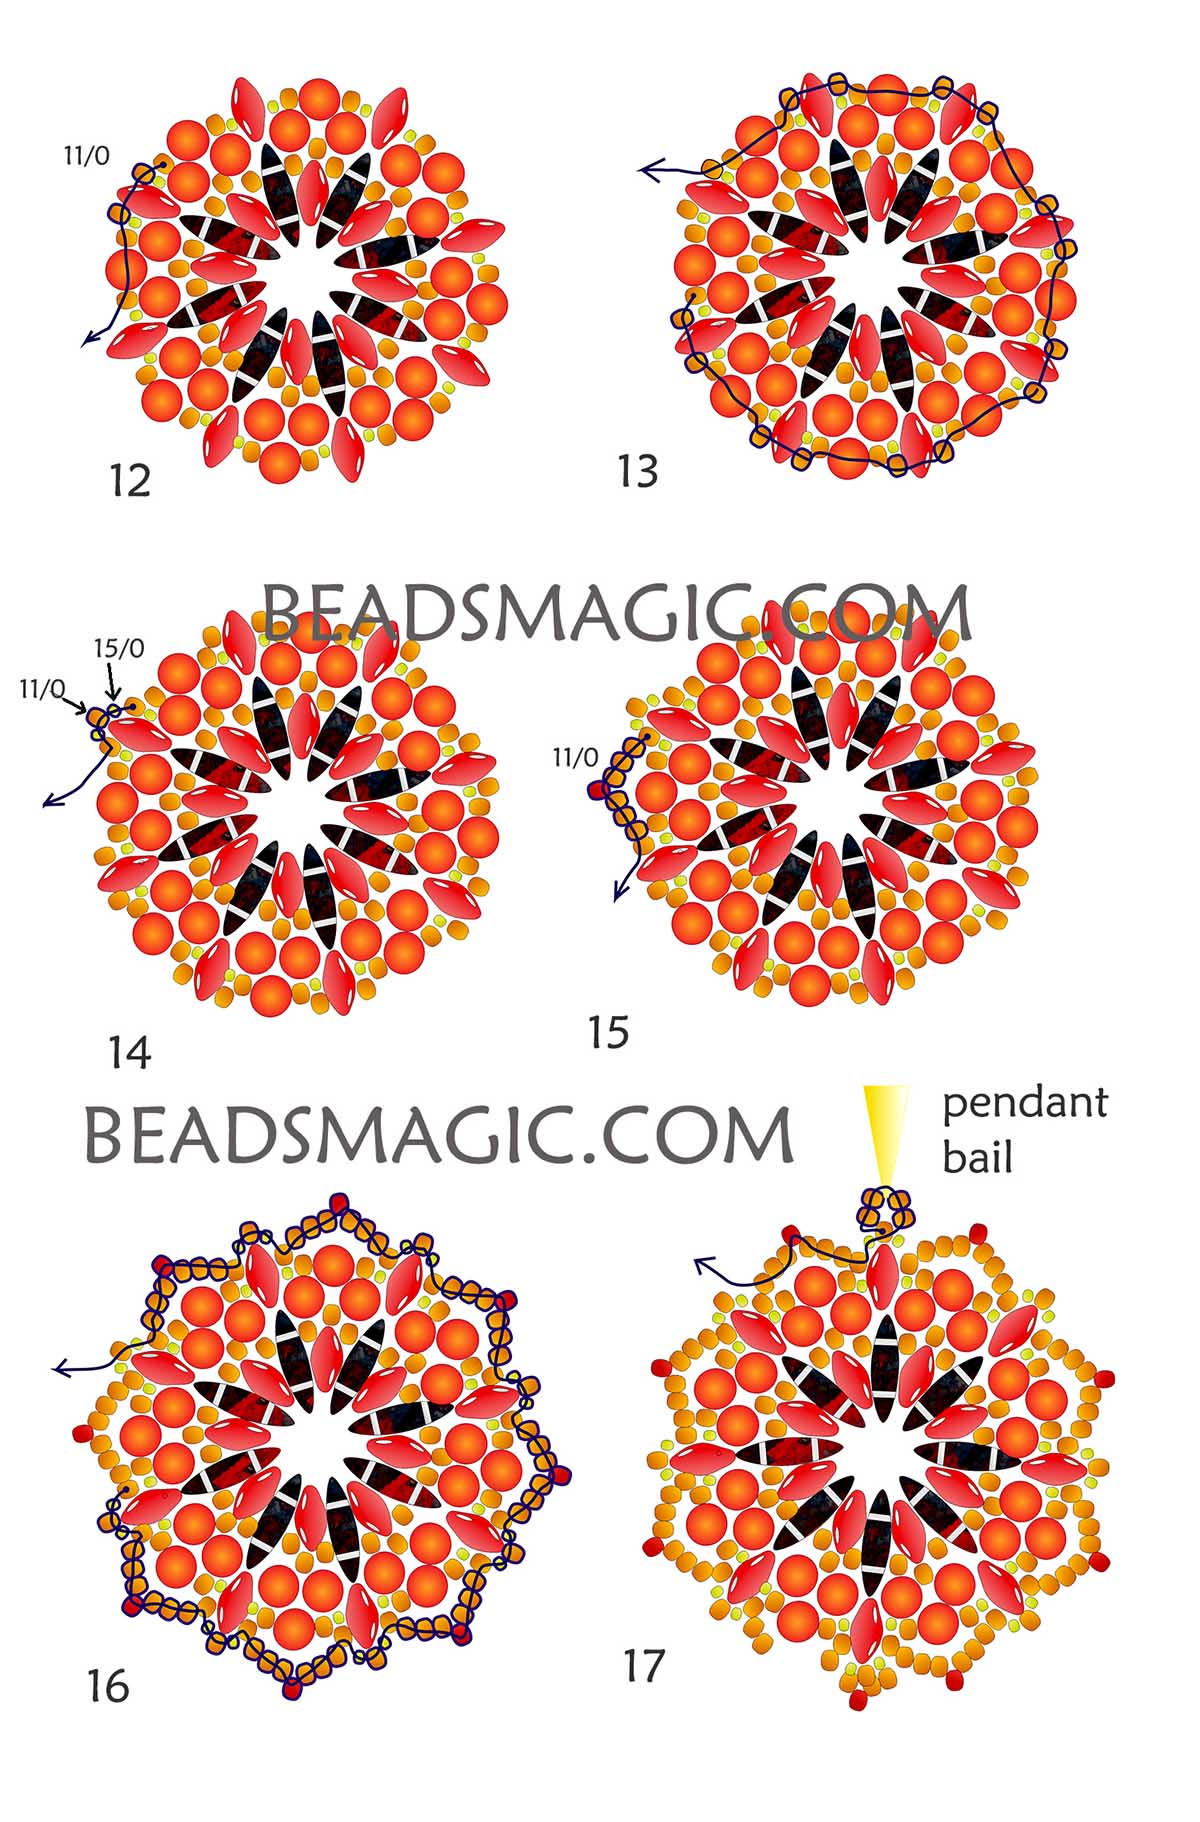 free bead pattern, DIY pendant, experienced beader, beading tutorial, step-by-step instructions, beaded pendant, Superduos, Crescents, pendant tutorial, Diy jewelry